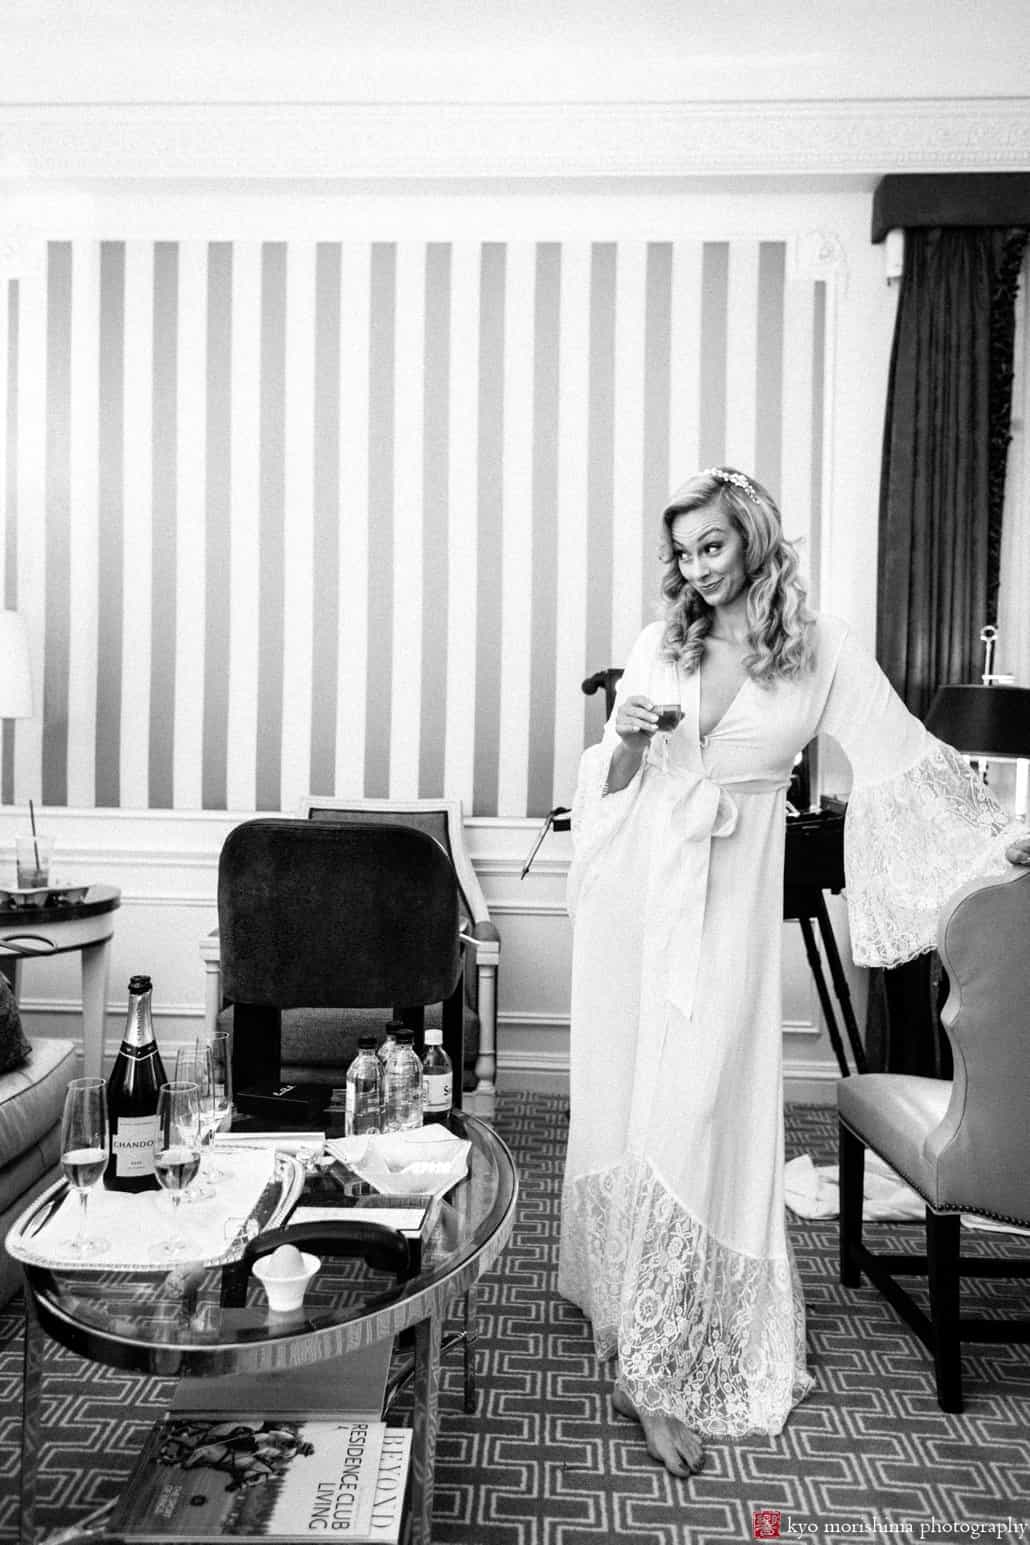 Bride lifts an eyebrow while getting ready at St. Regis Hotel in NYC, photographed by candid wedding photographer Kyo Morishima